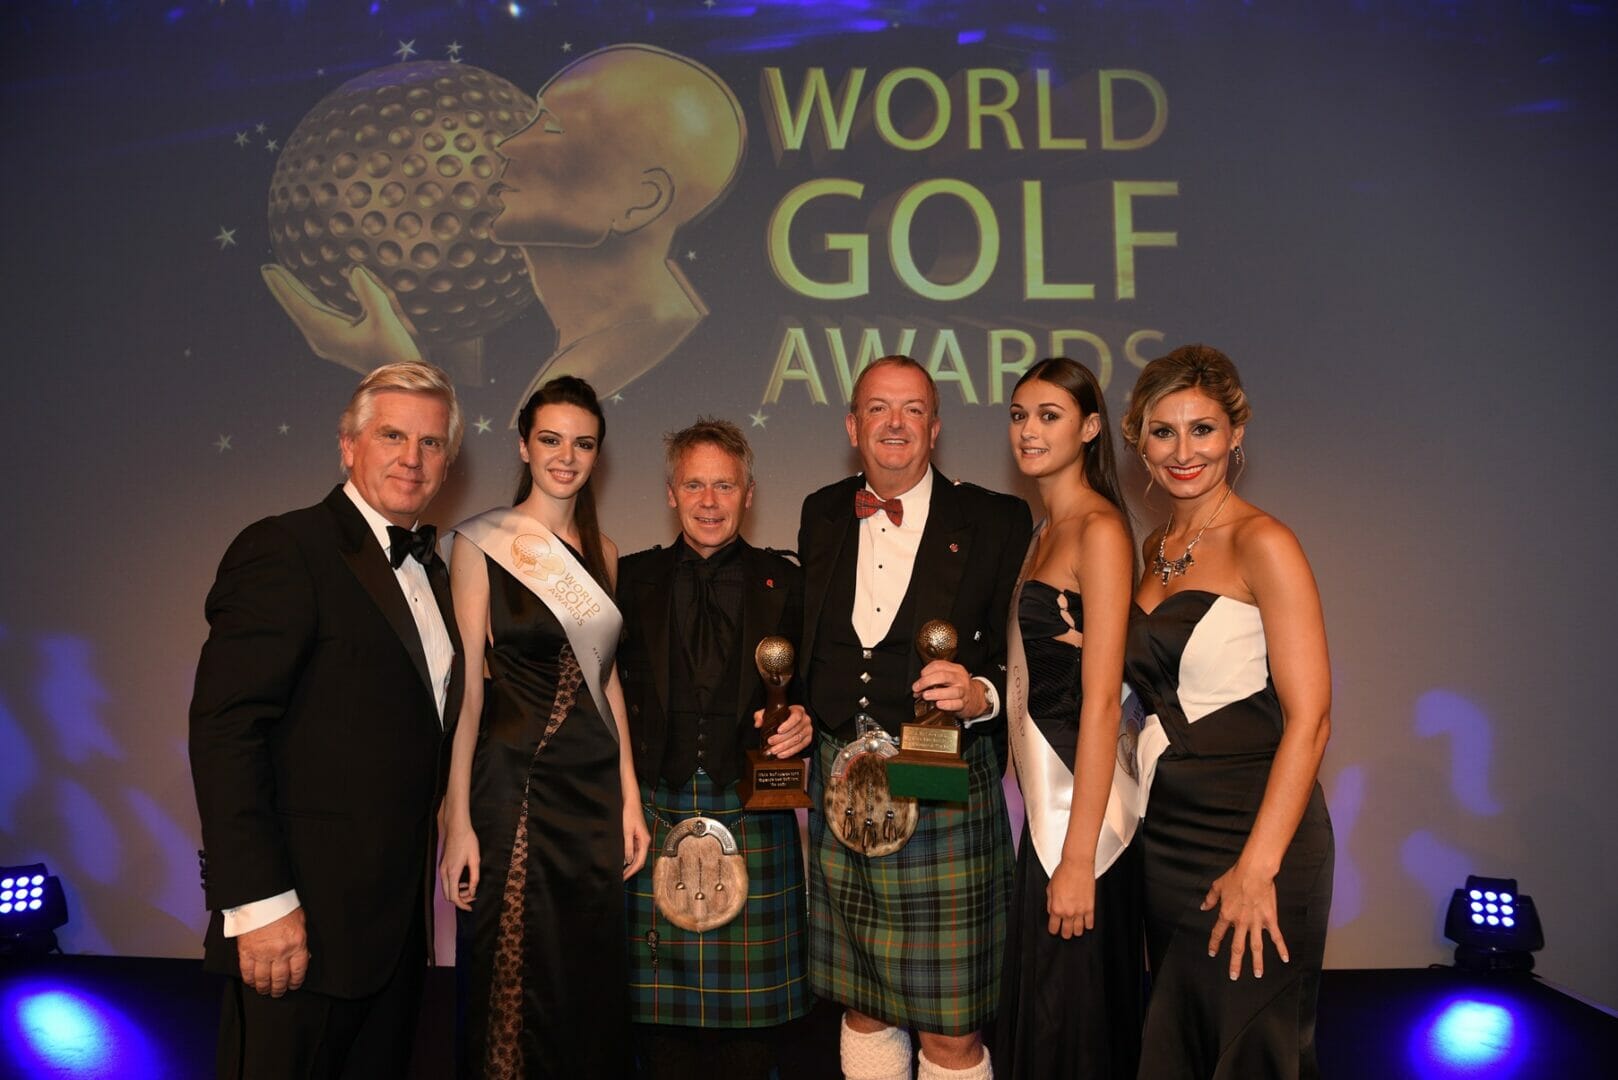 THE BELFRY HOTEL & RESORT NAMED EUROPE’S BEST GOLF HOTEL AT THE 2016 WORLD GOLF AWARDS